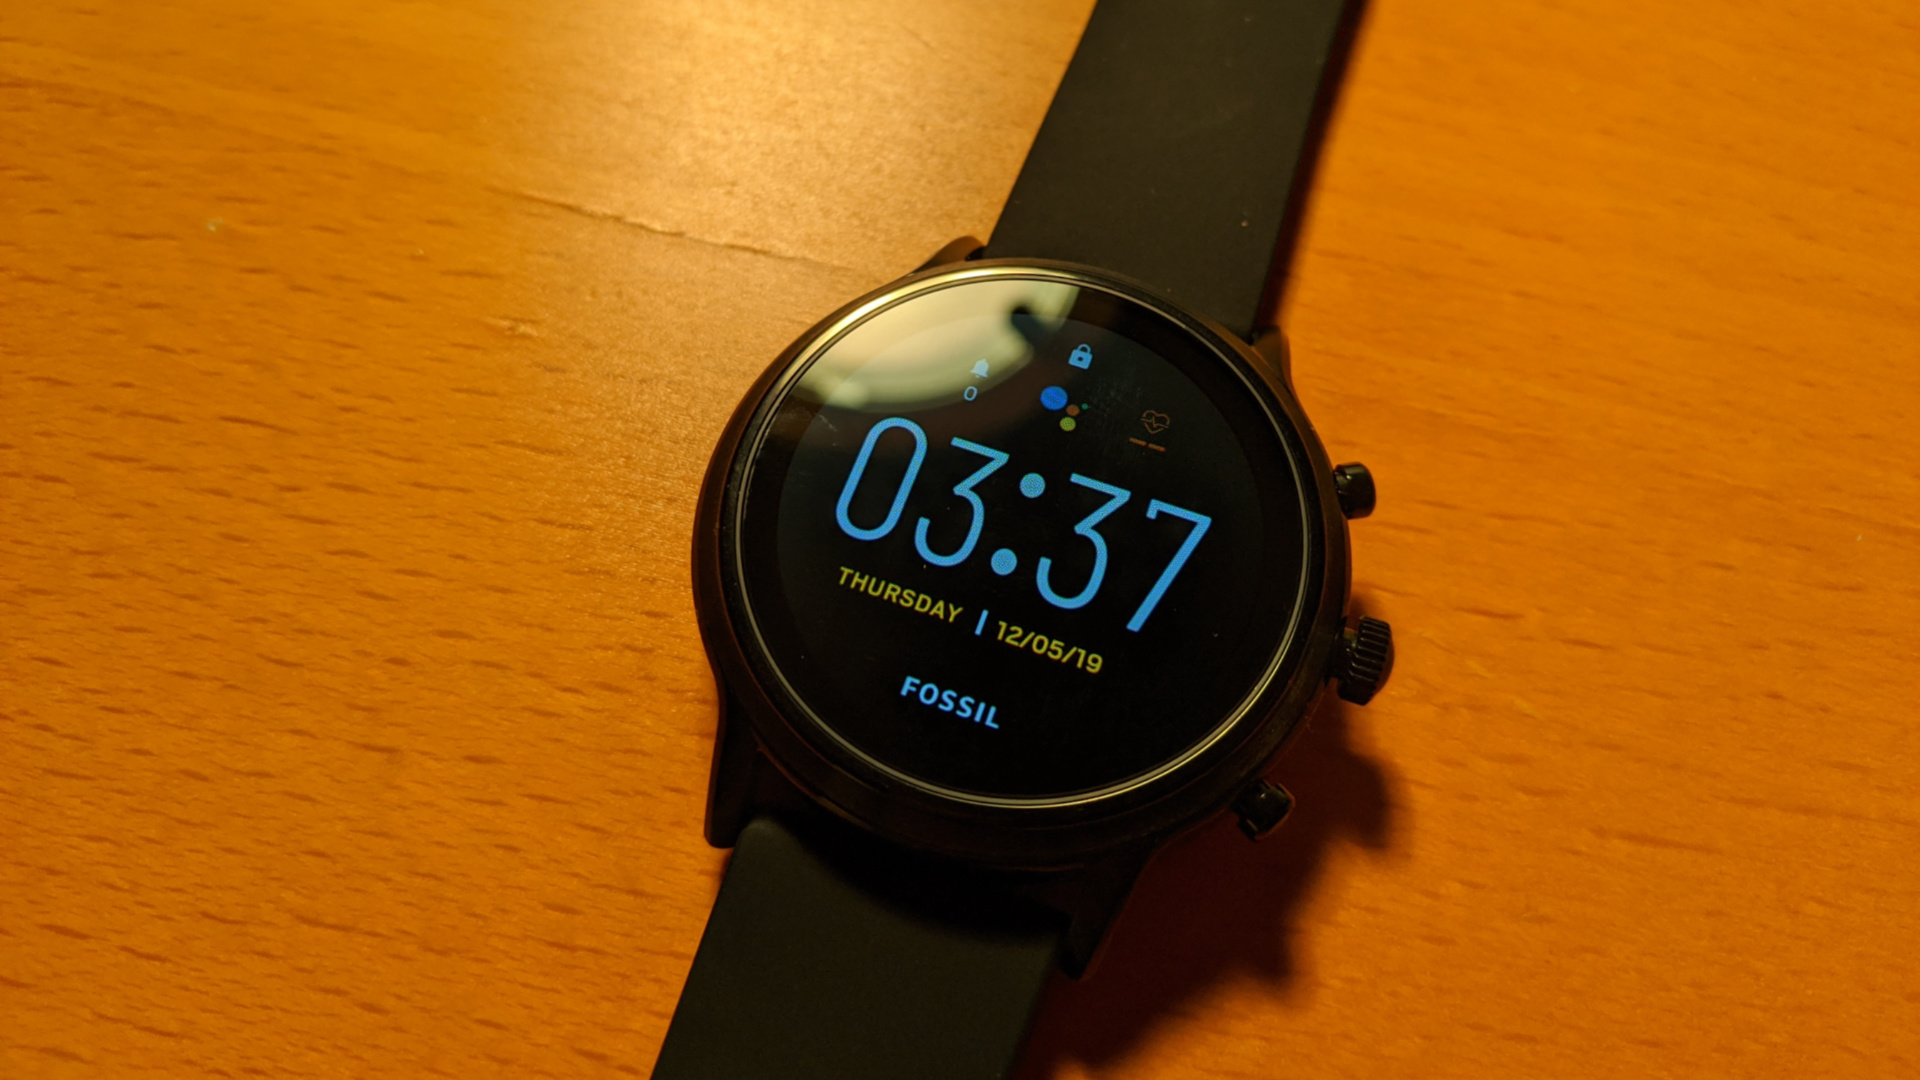 Fossil Gen 5 on a table